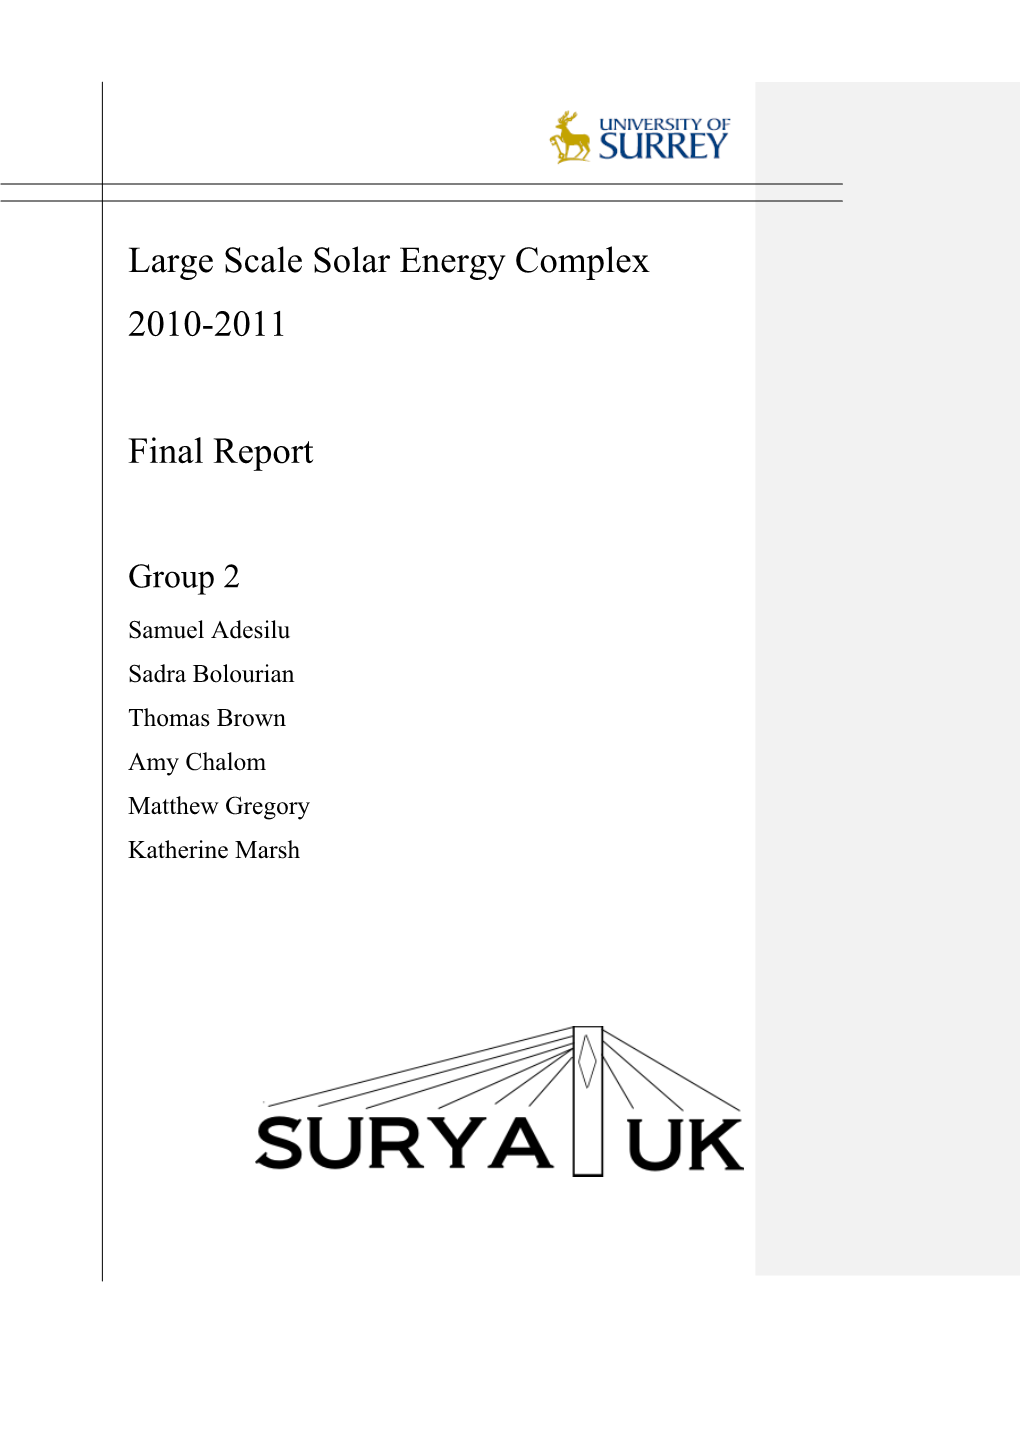 Large Scale Solar Energy Complex 2010-2011